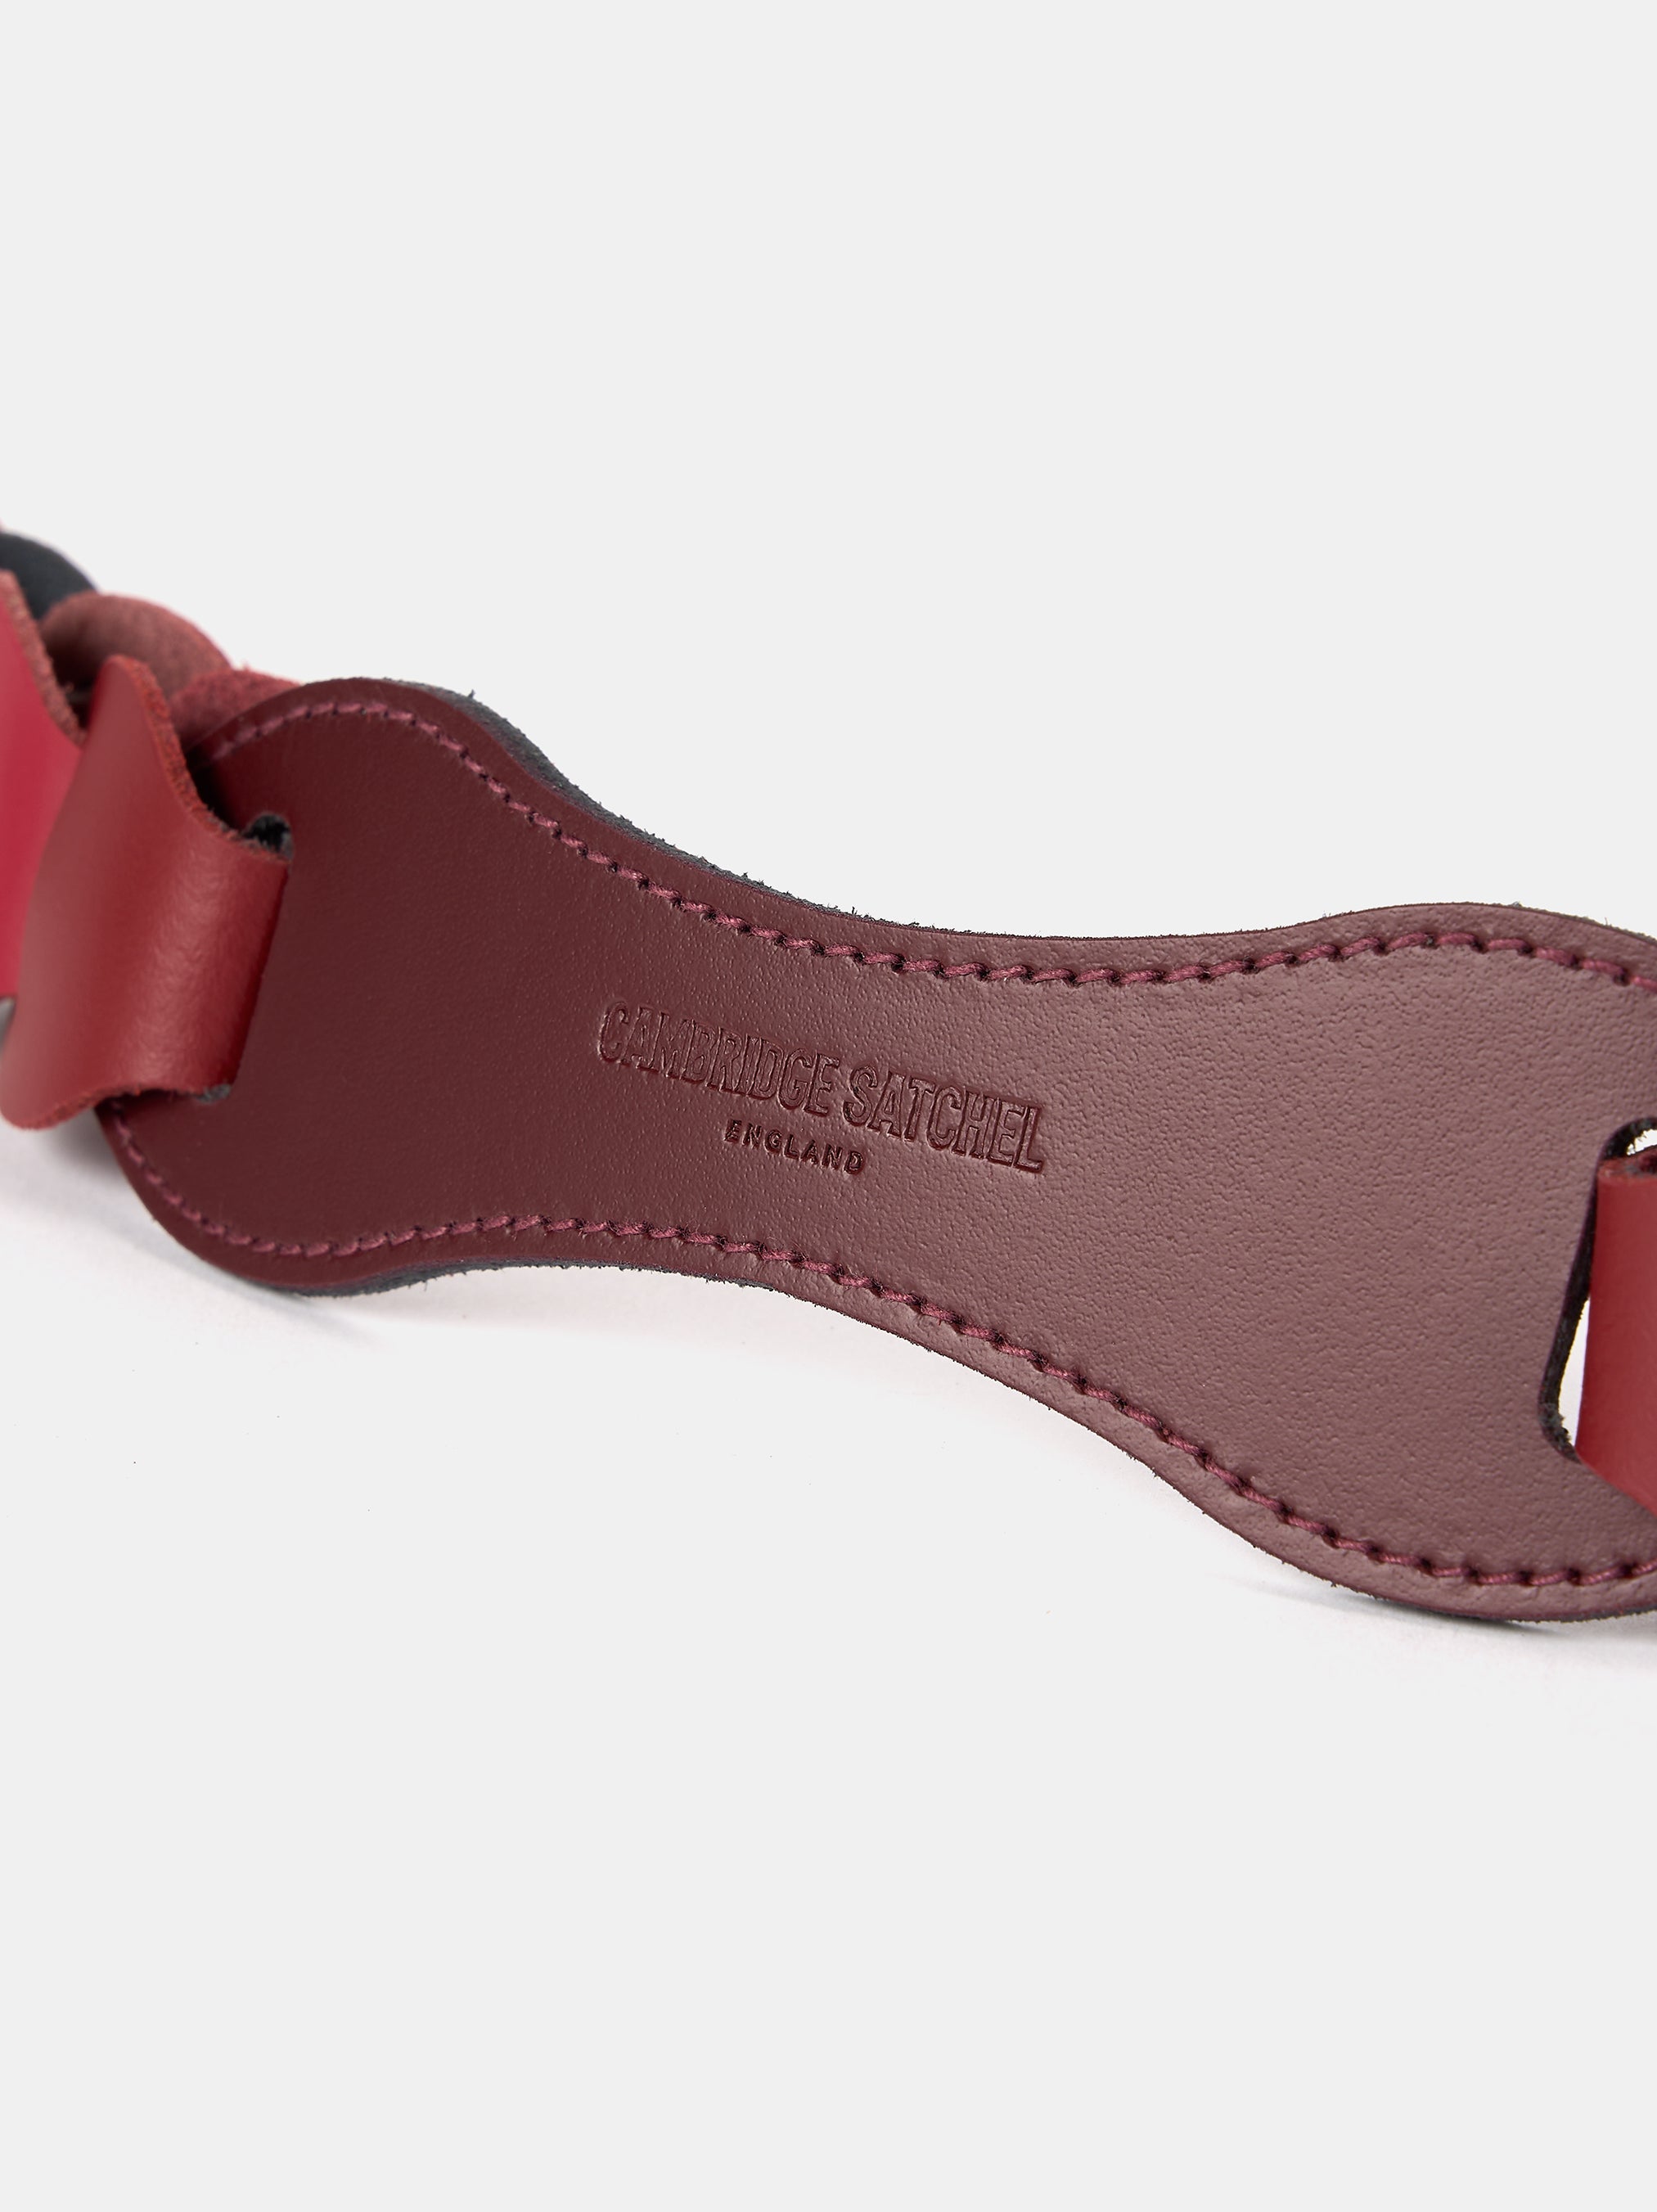 The Link Strap - Oxblood Tri-Colour & Pale Gold Hardware